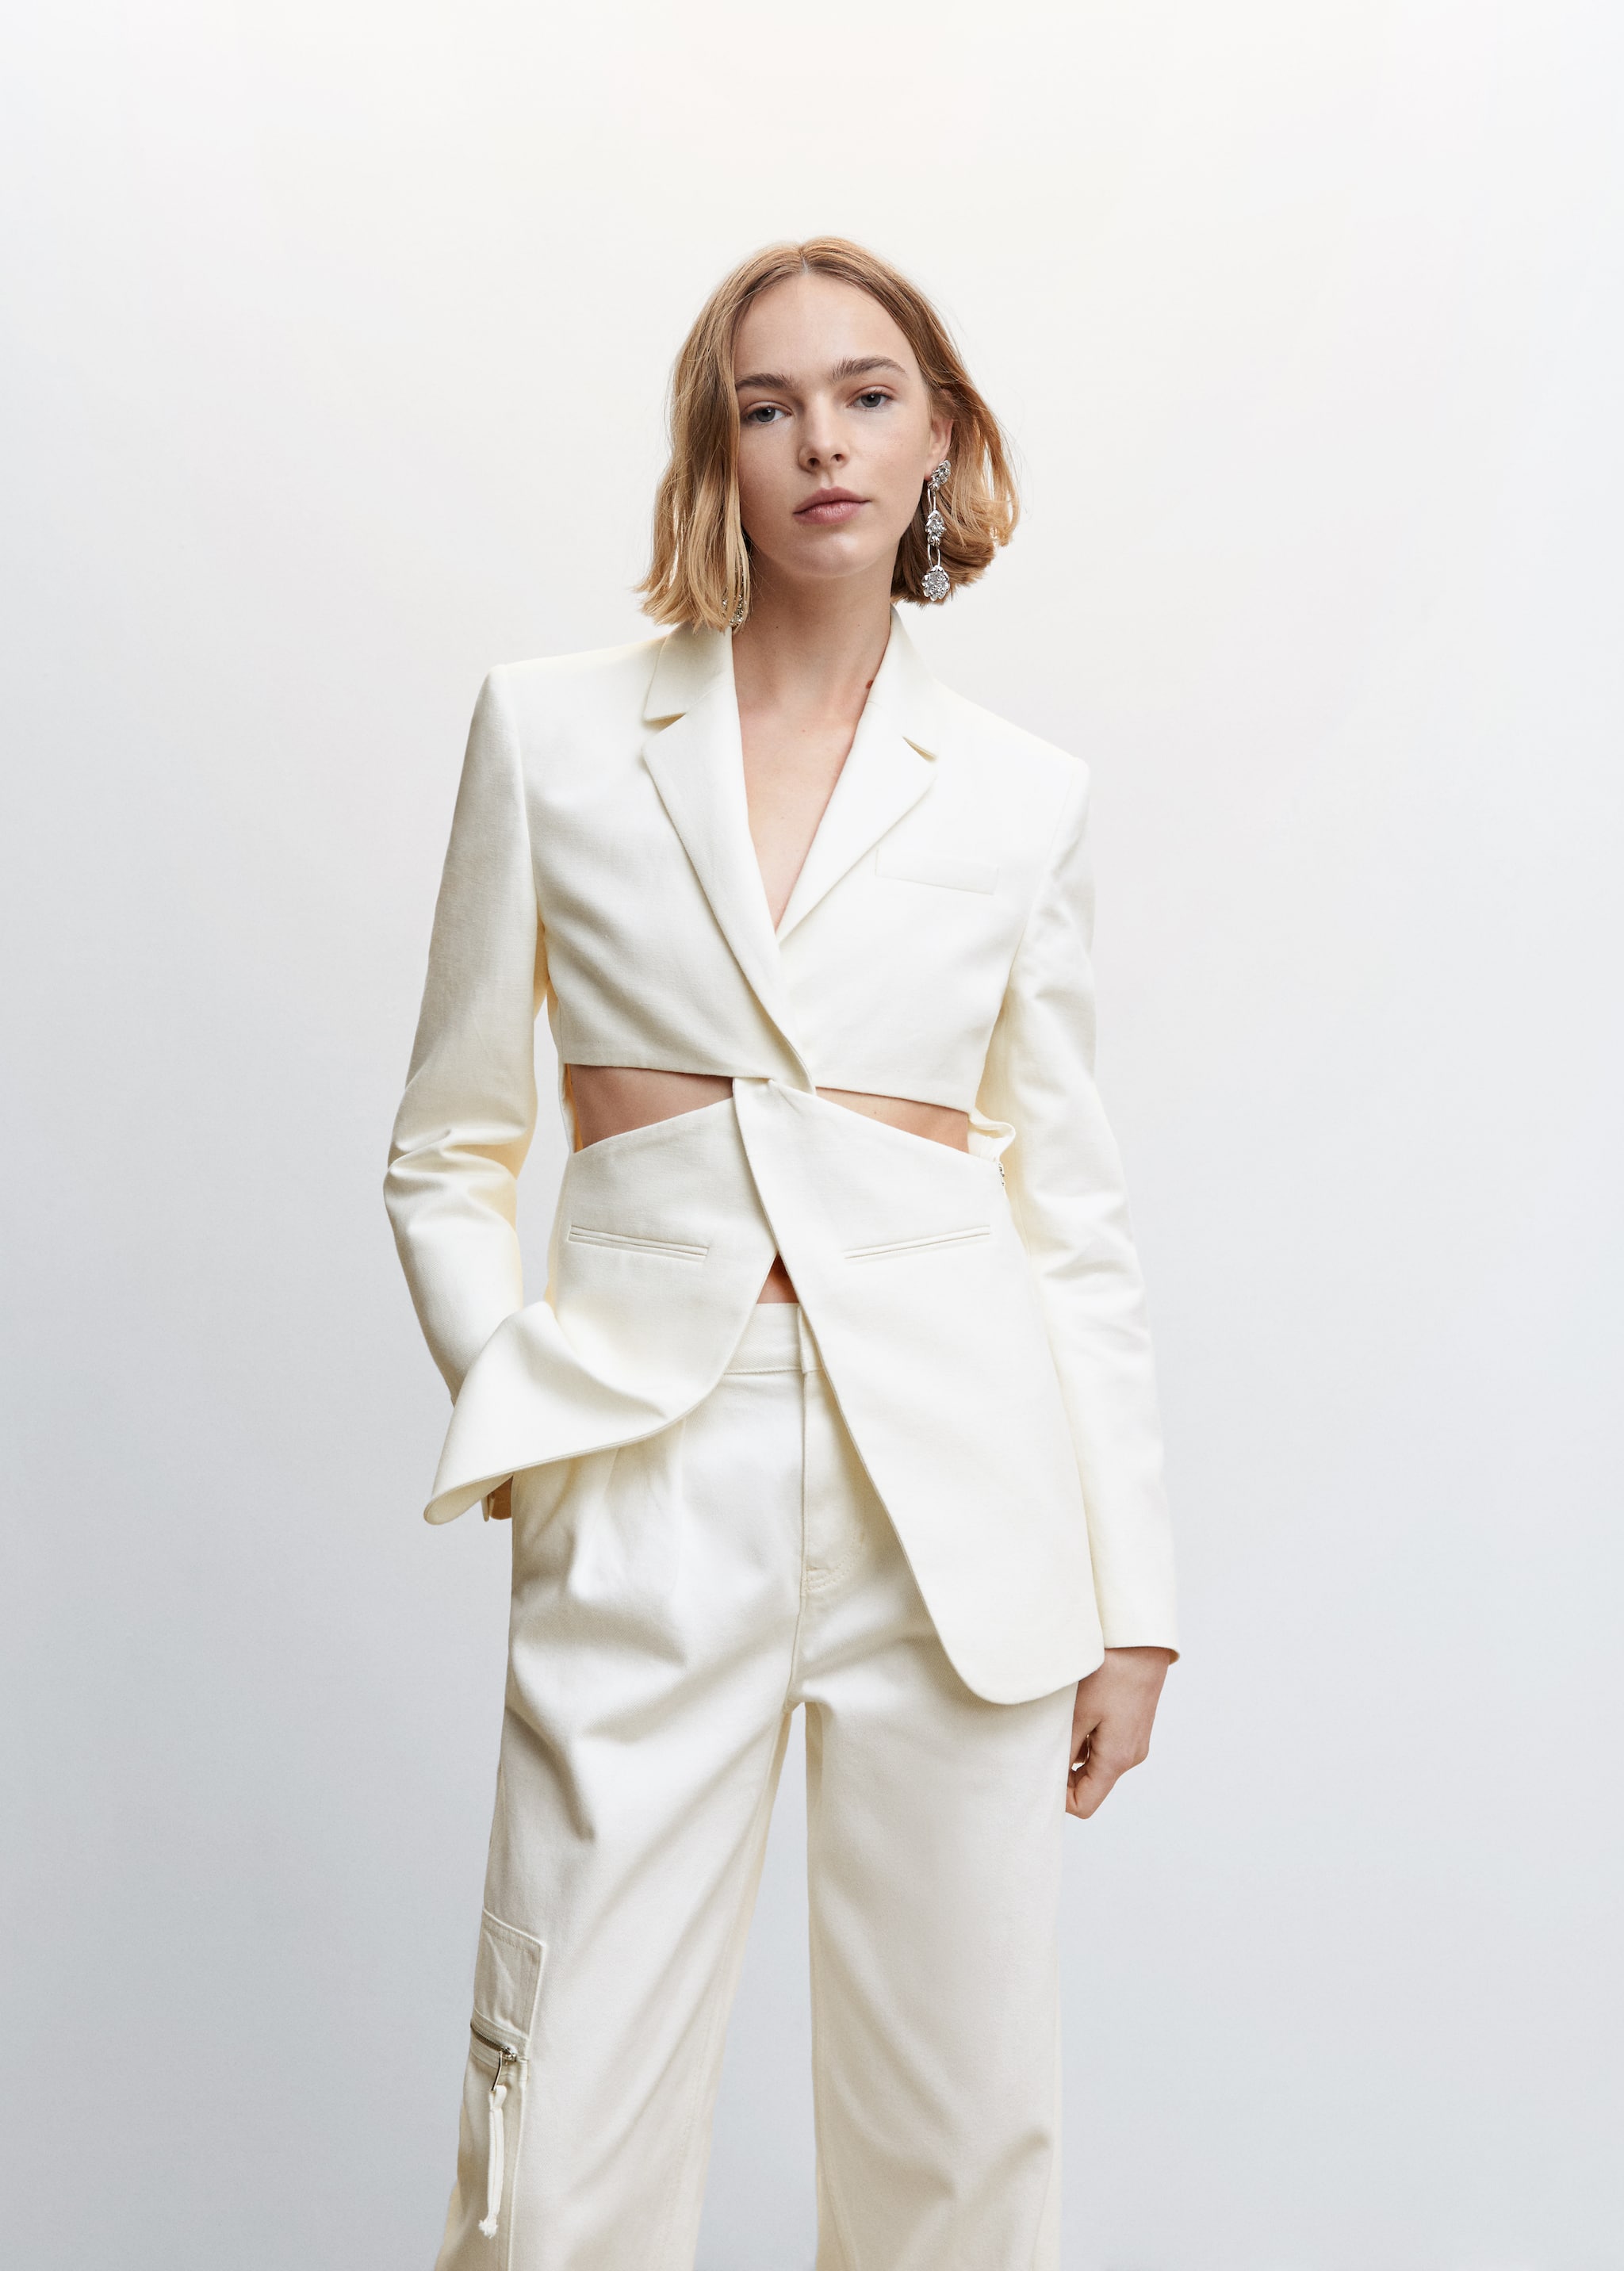 Linen jacket with cut-out - Medium plane